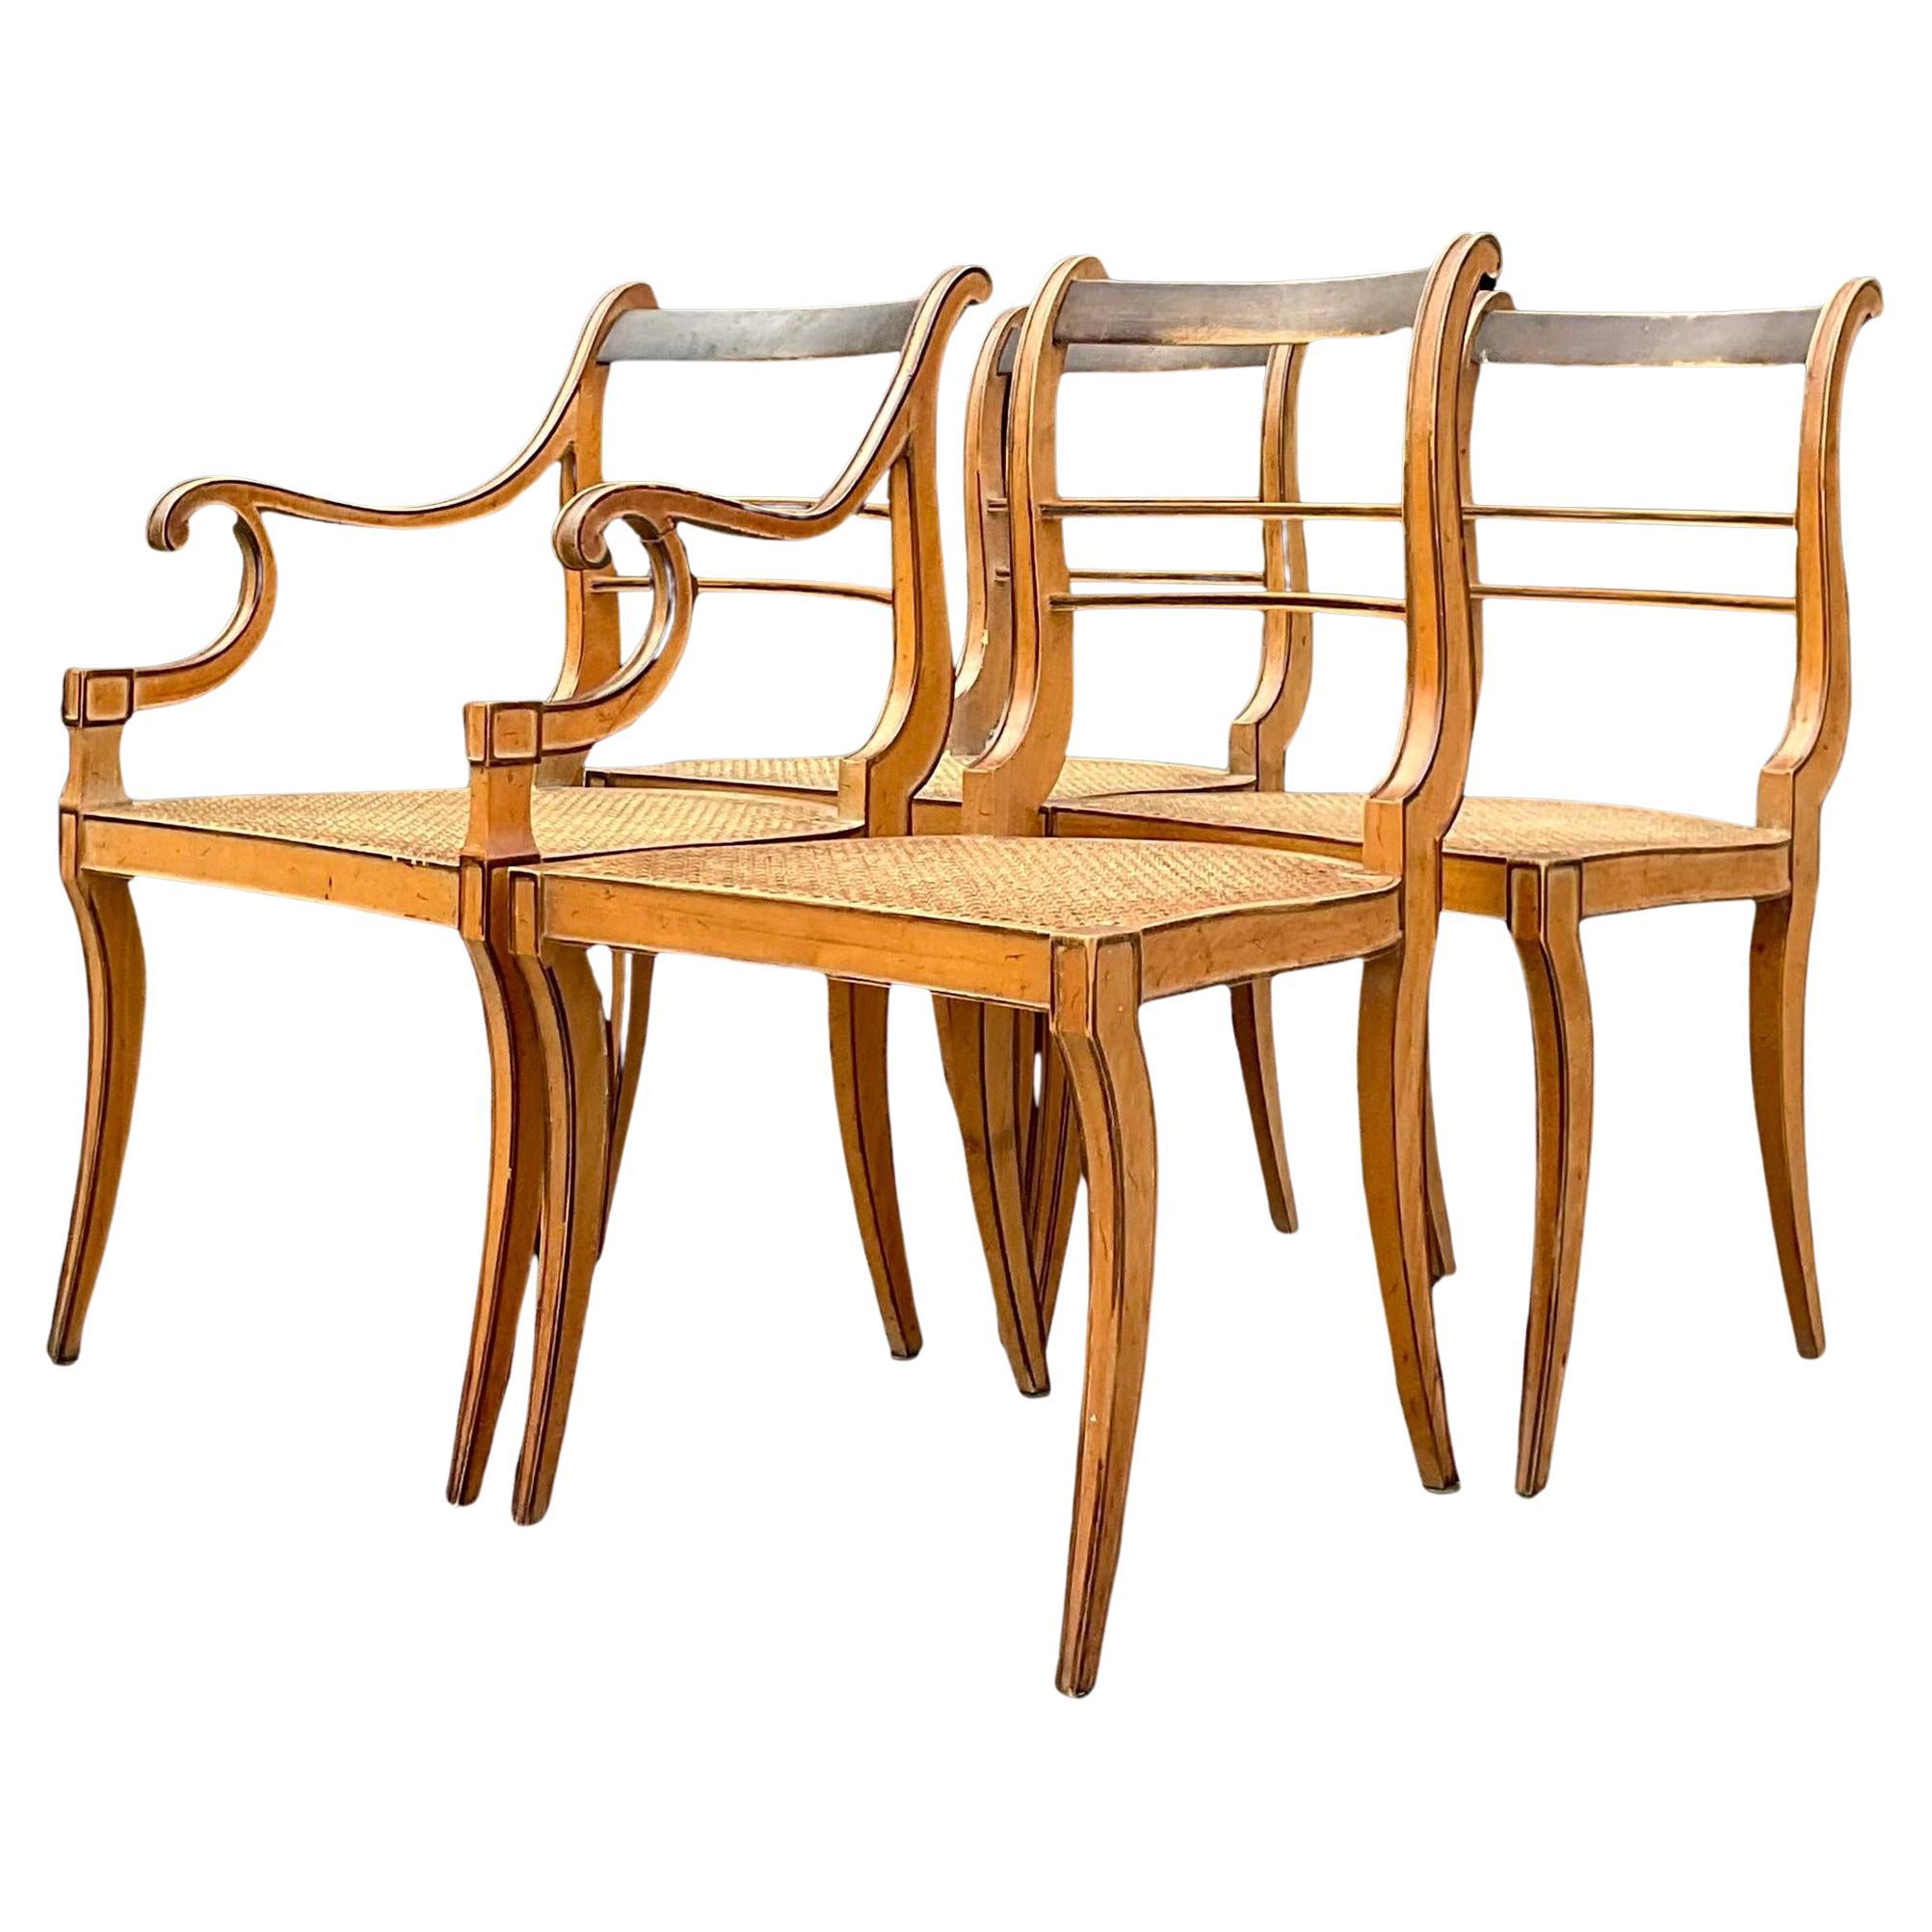 Vintage Boho Scroll Back Cane Dining Chairs - Set of Four